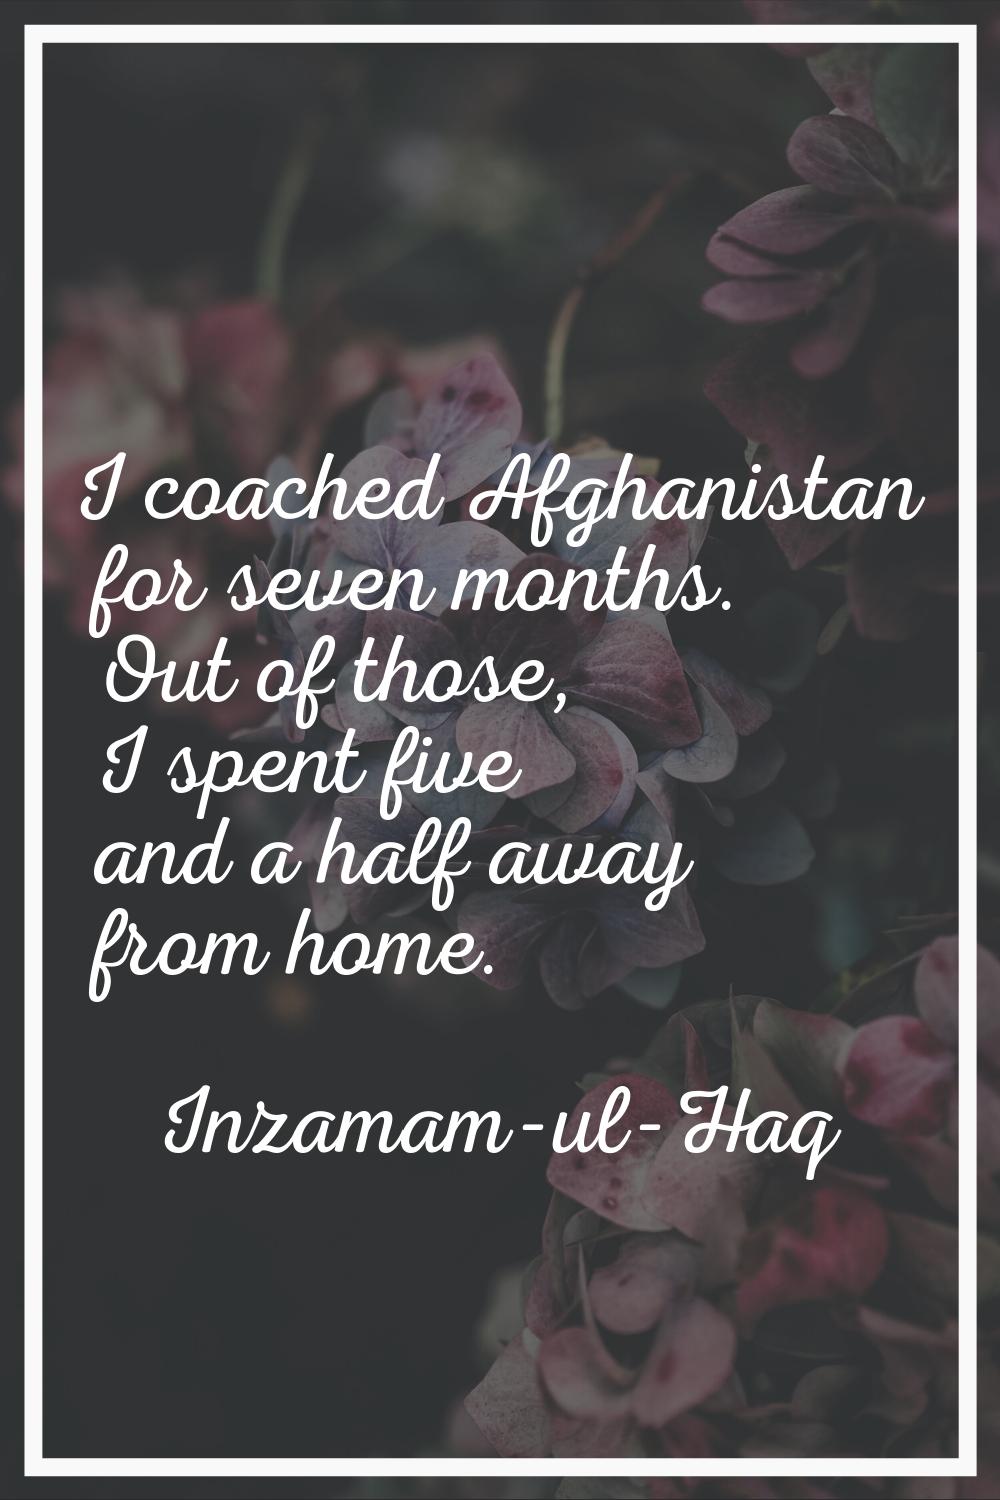 I coached Afghanistan for seven months. Out of those, I spent five and a half away from home.